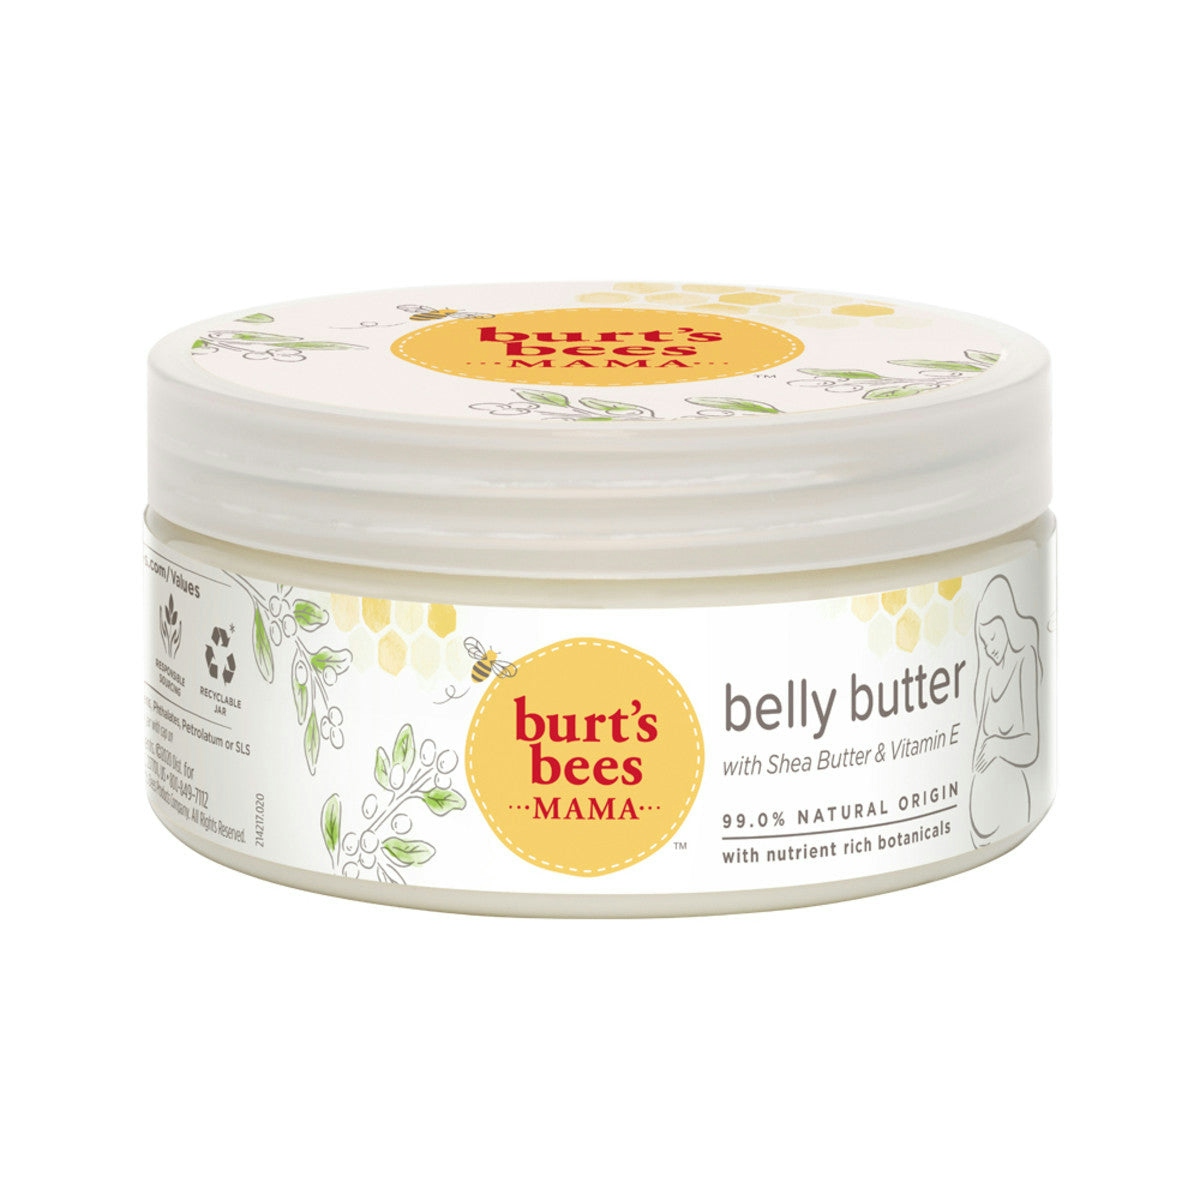 image of Burt's Bees Mama Bee Belly Butter with Shea Butter & Vitamin E 185g on white background 